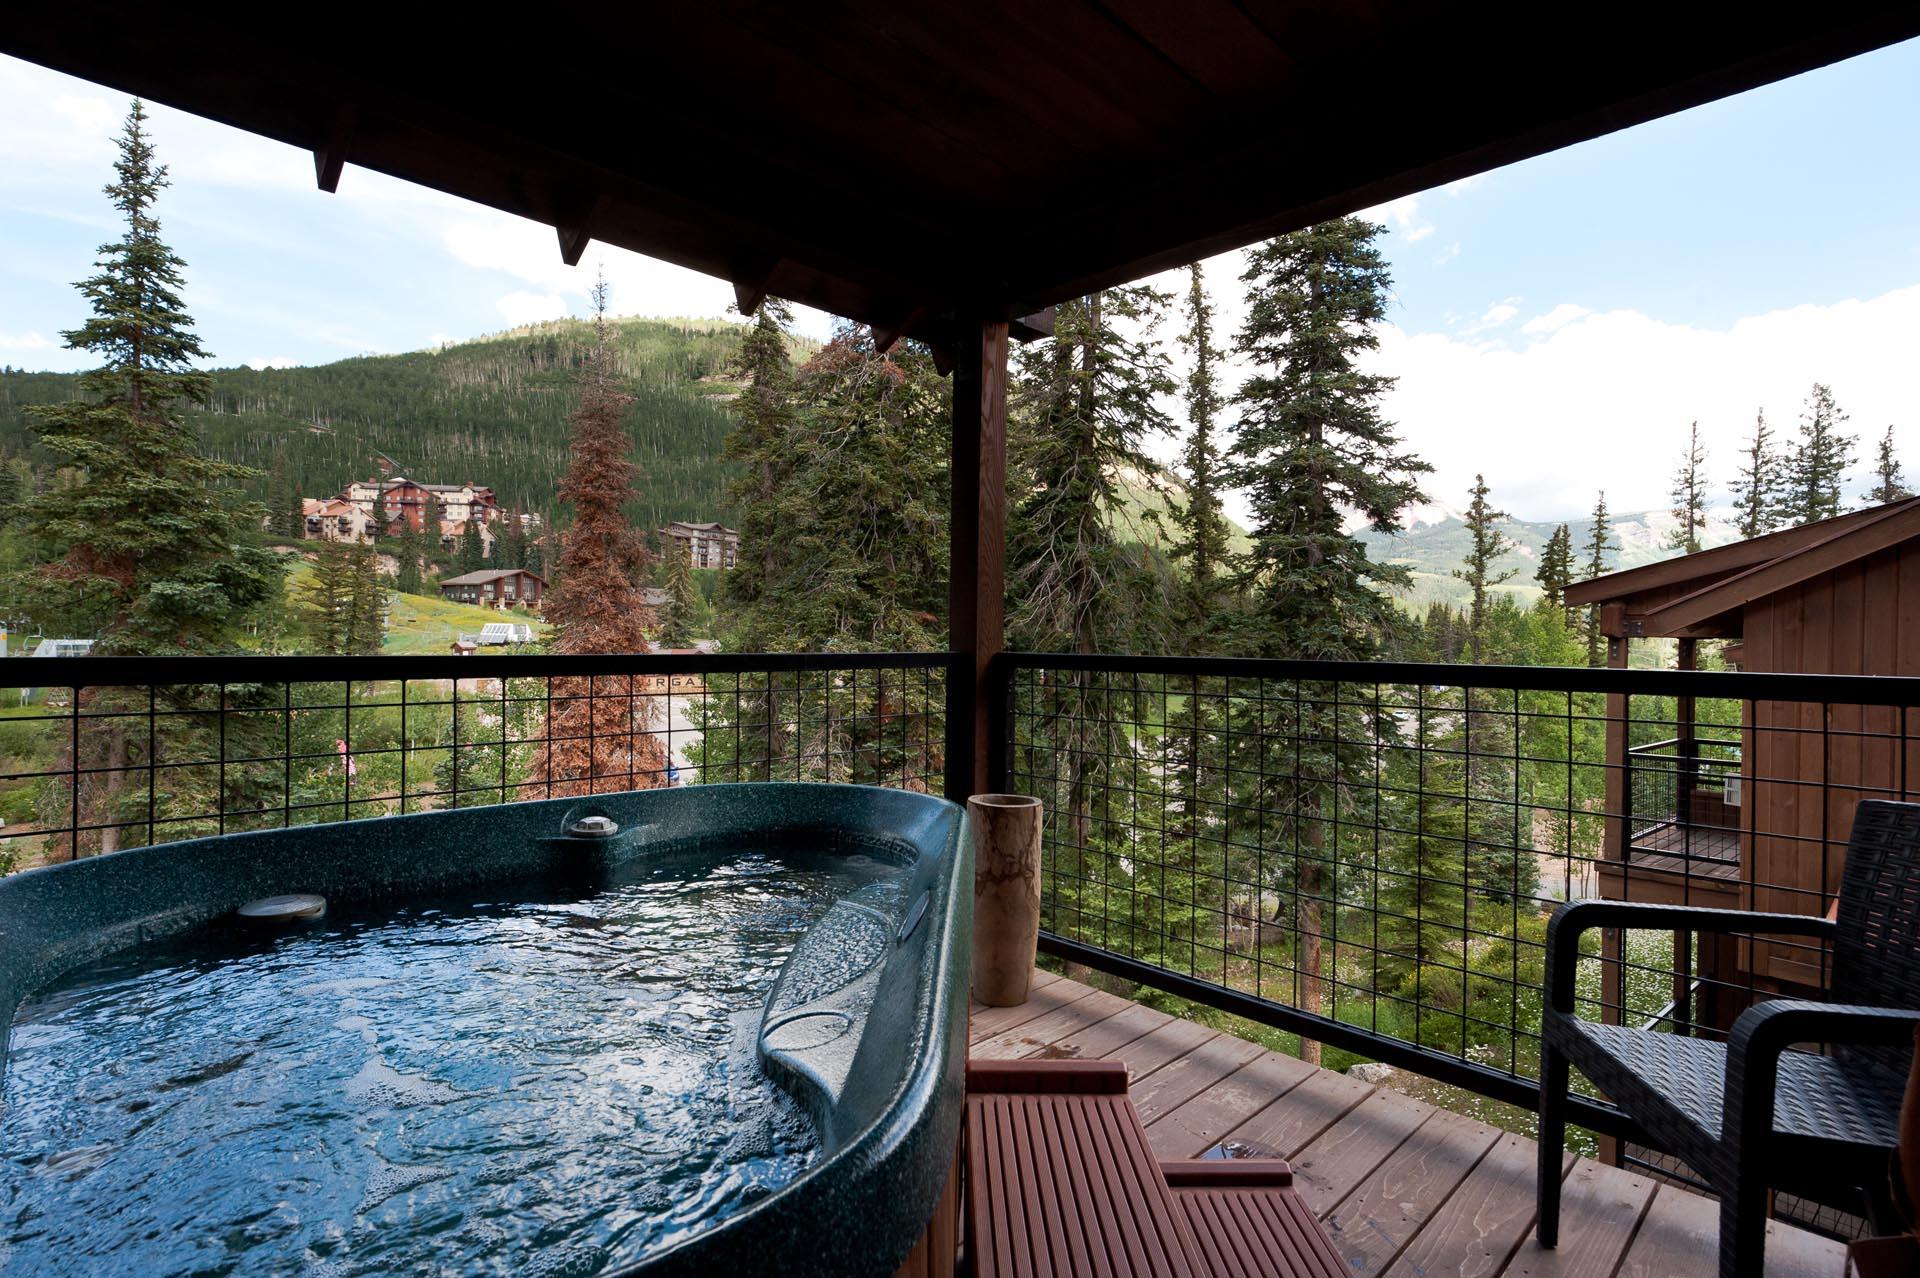 Private 2 person hot tub on the master bedroom deck with views of Purgatory Ski Resort